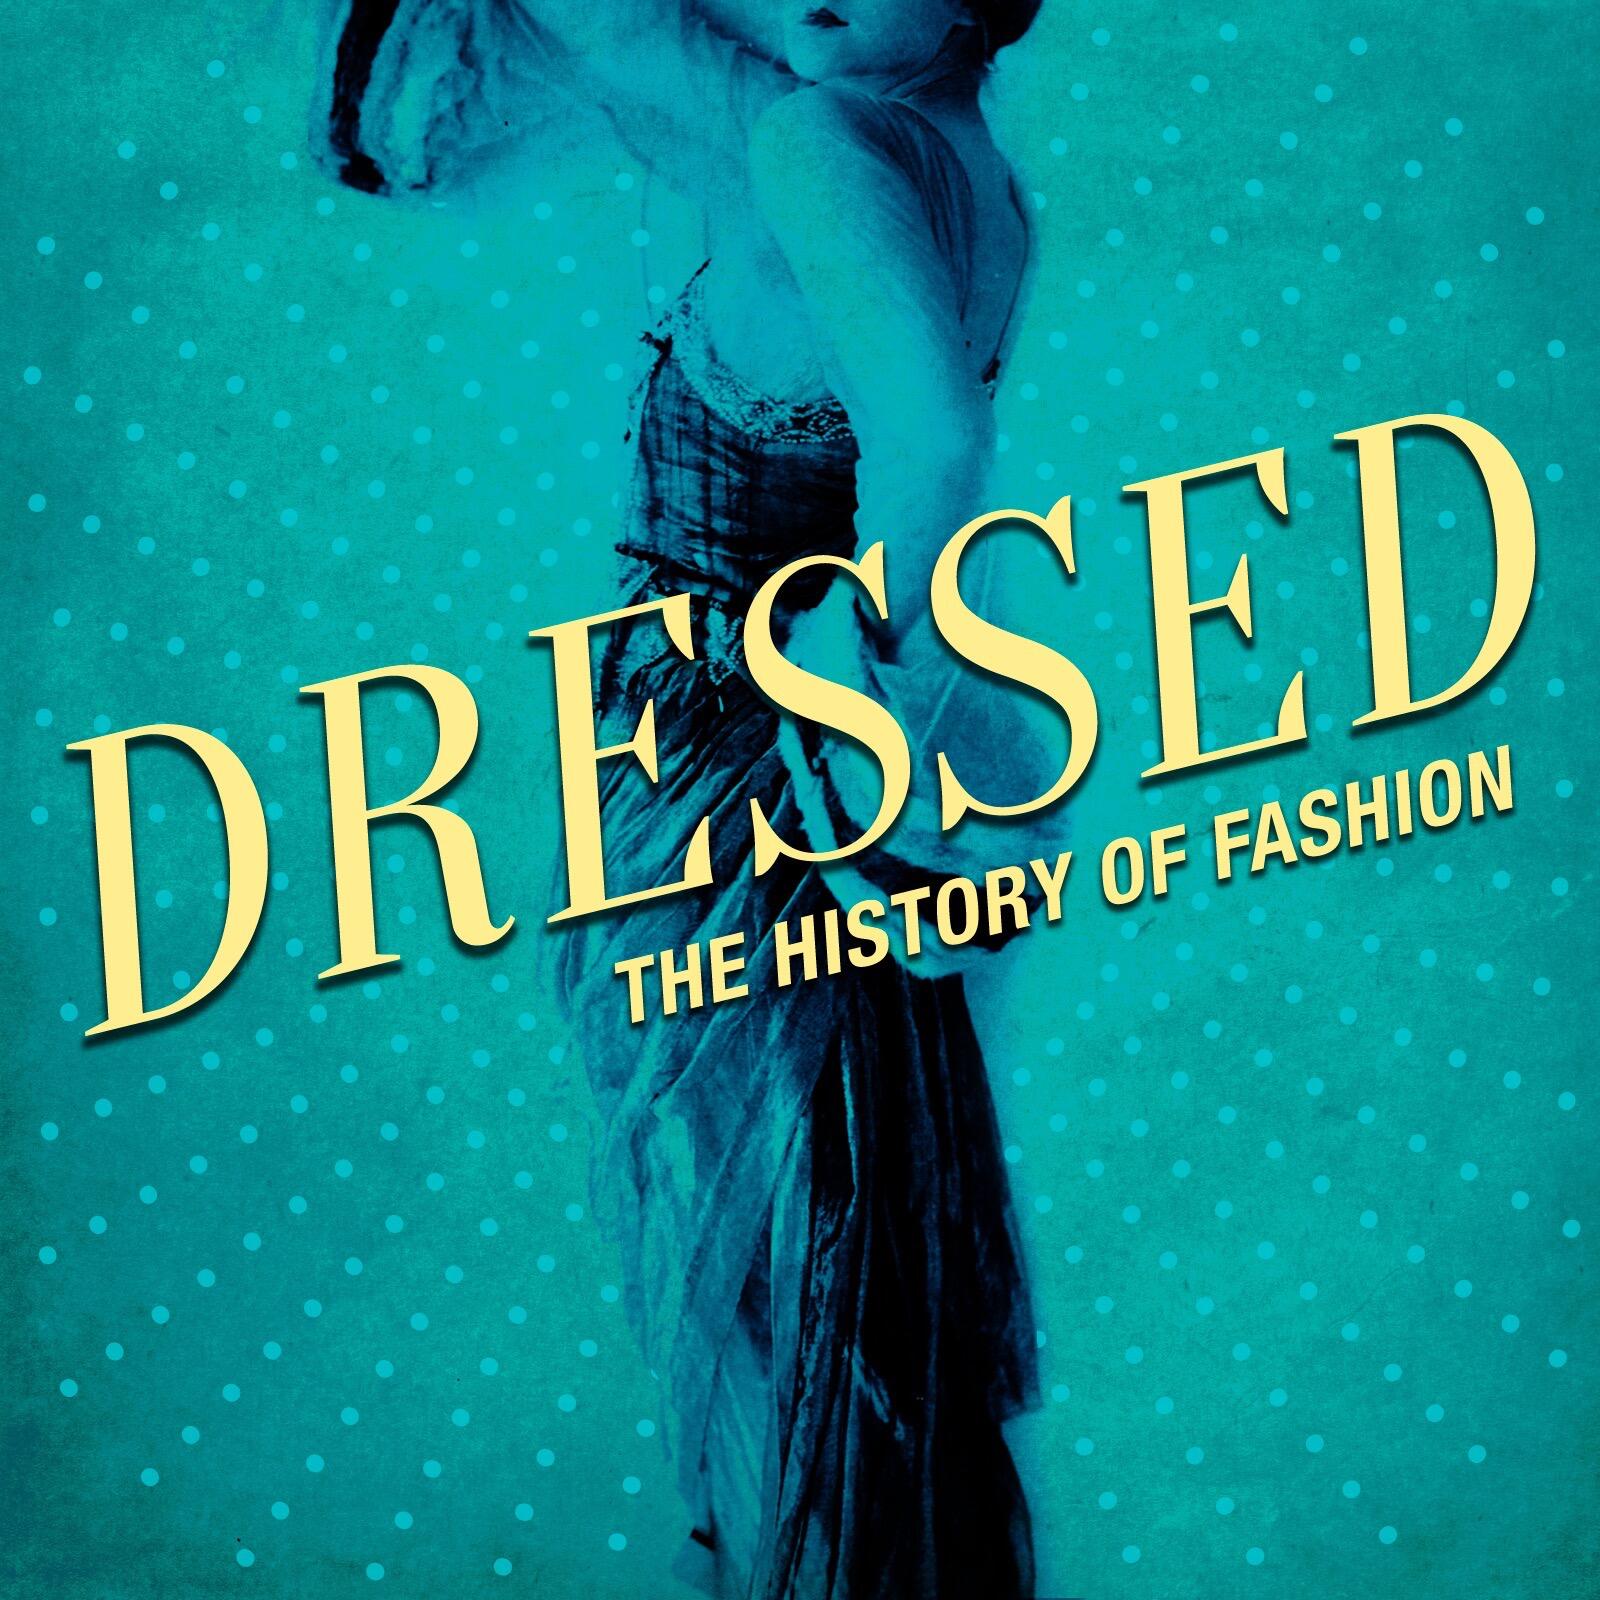 Listen Free to Dressed: The History of Fashion on iHeartRadio Podcasts |  iHeartRadio